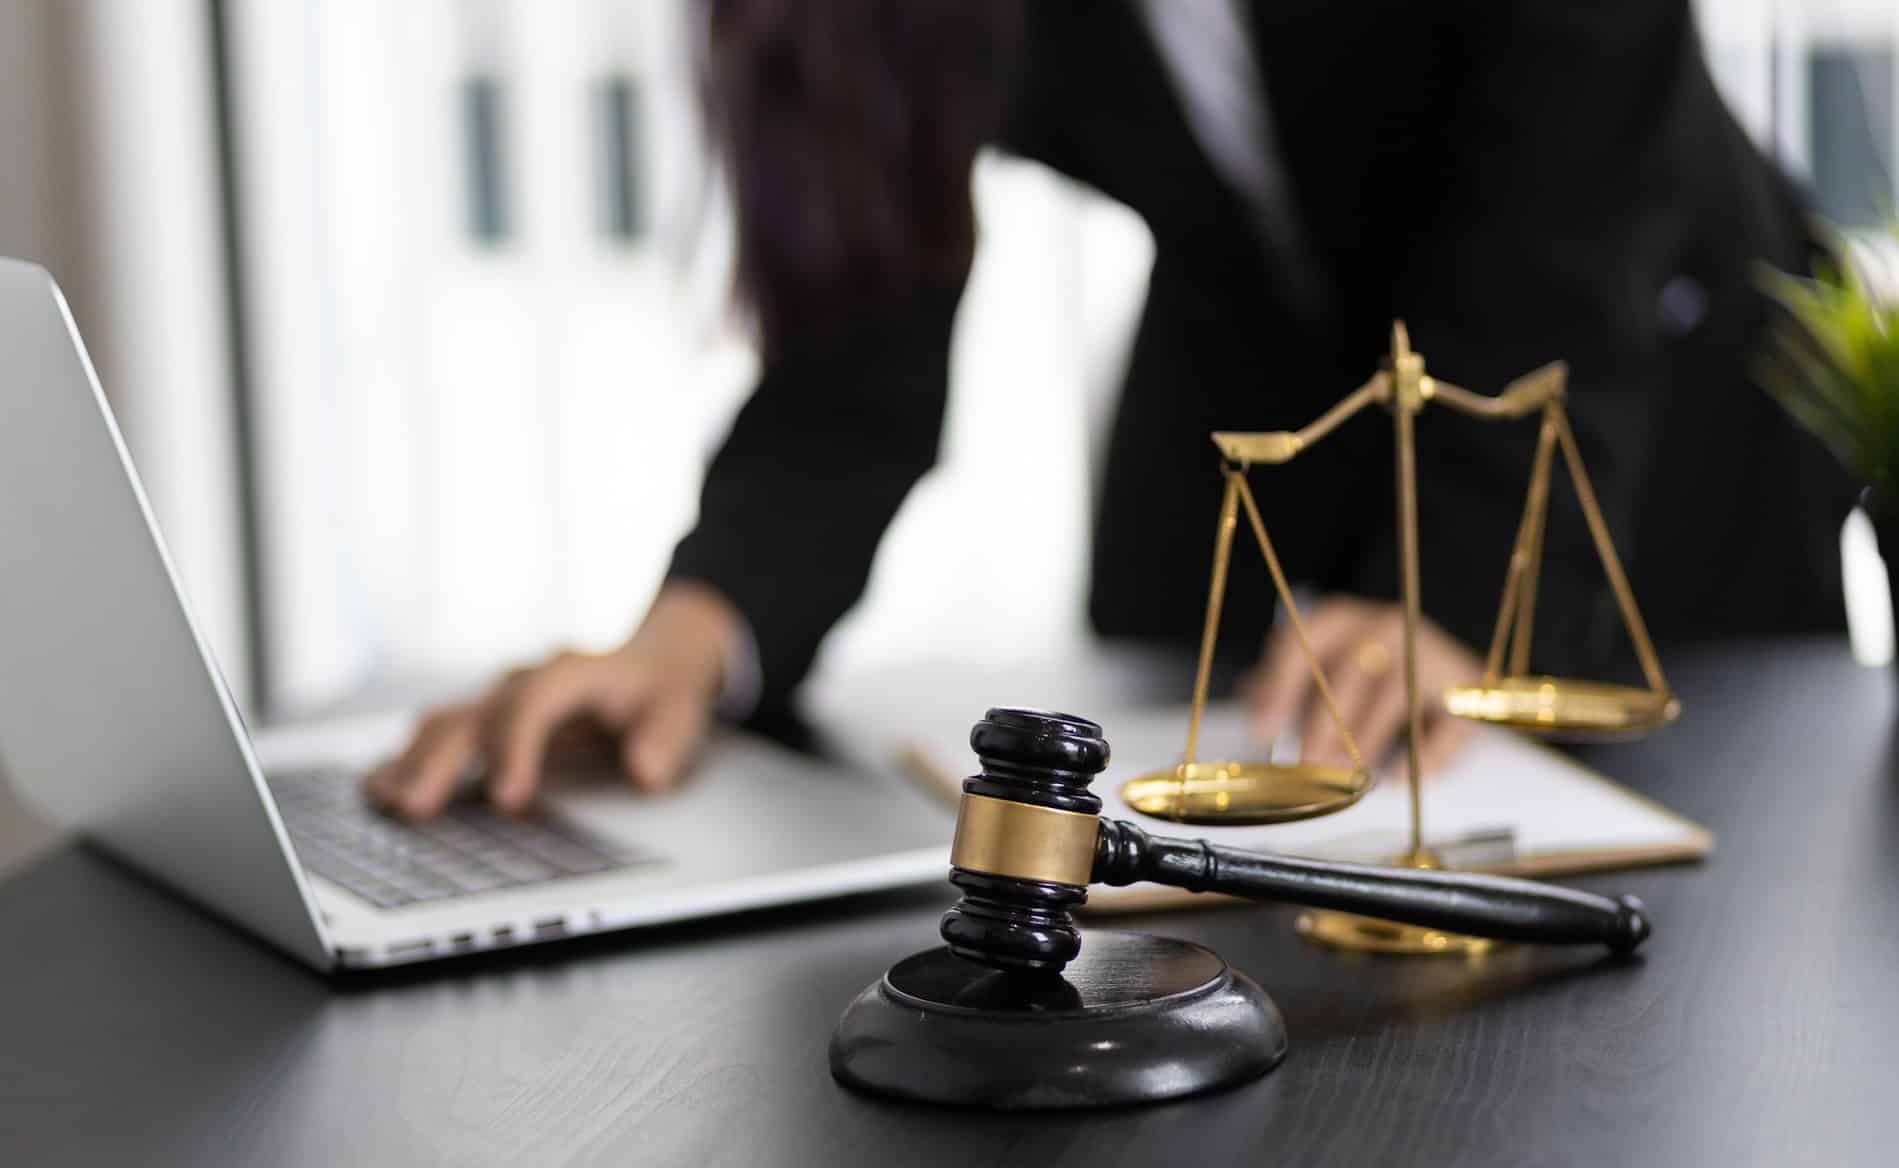 Computer with a gavel and legal scale